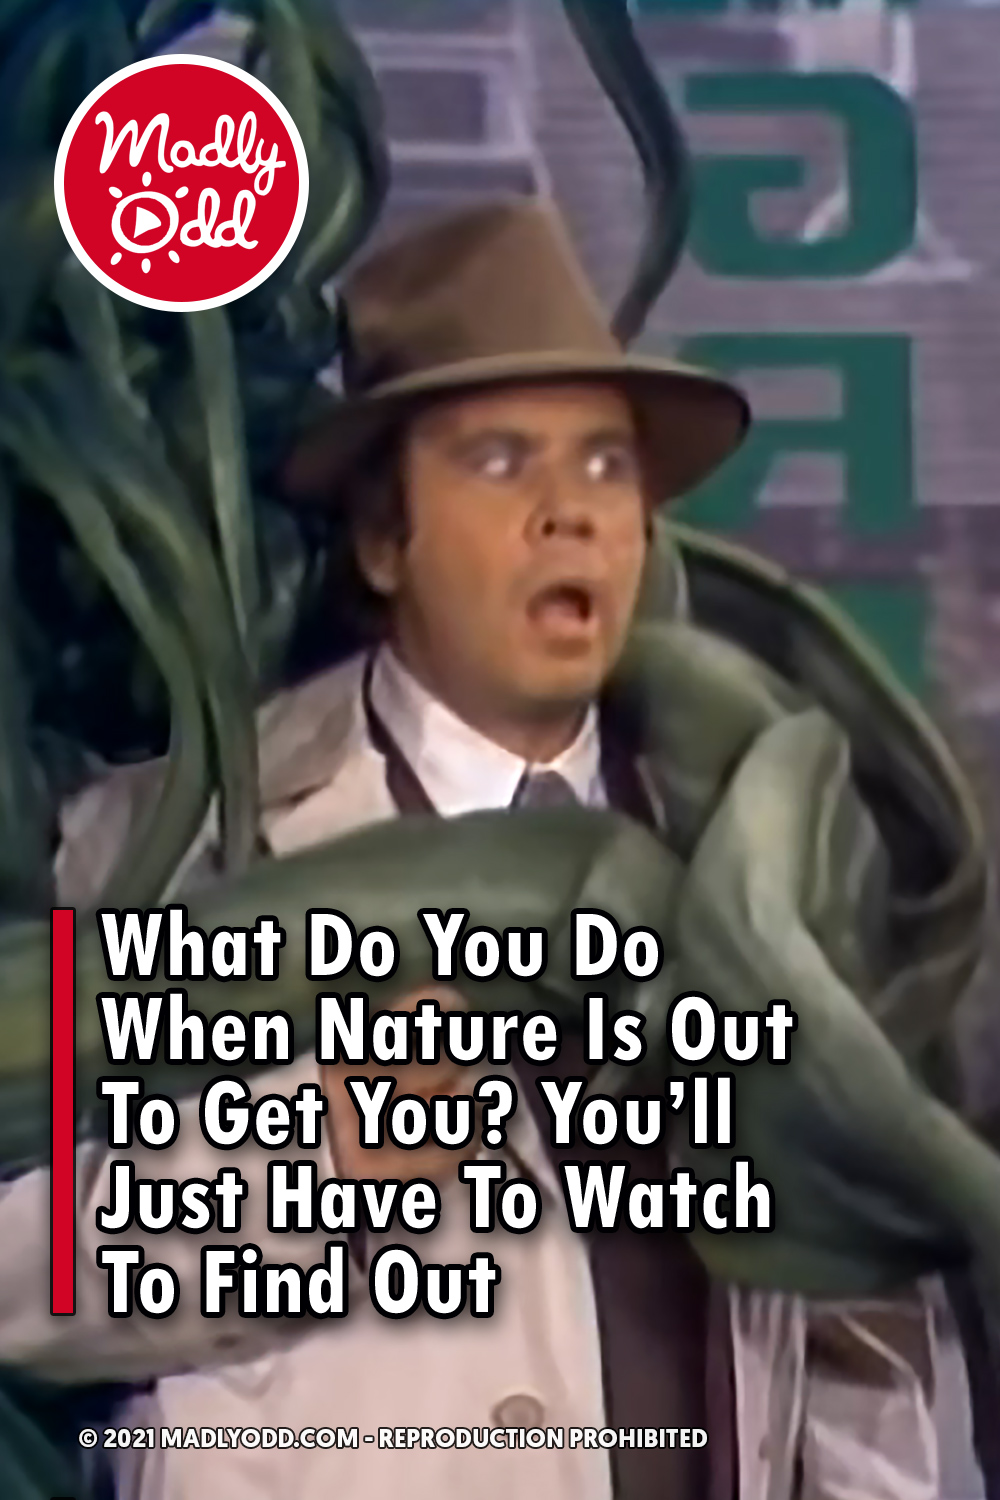 What Do You Do When Nature Is Out To Get You? You’ll Just Have To Watch To Find Out